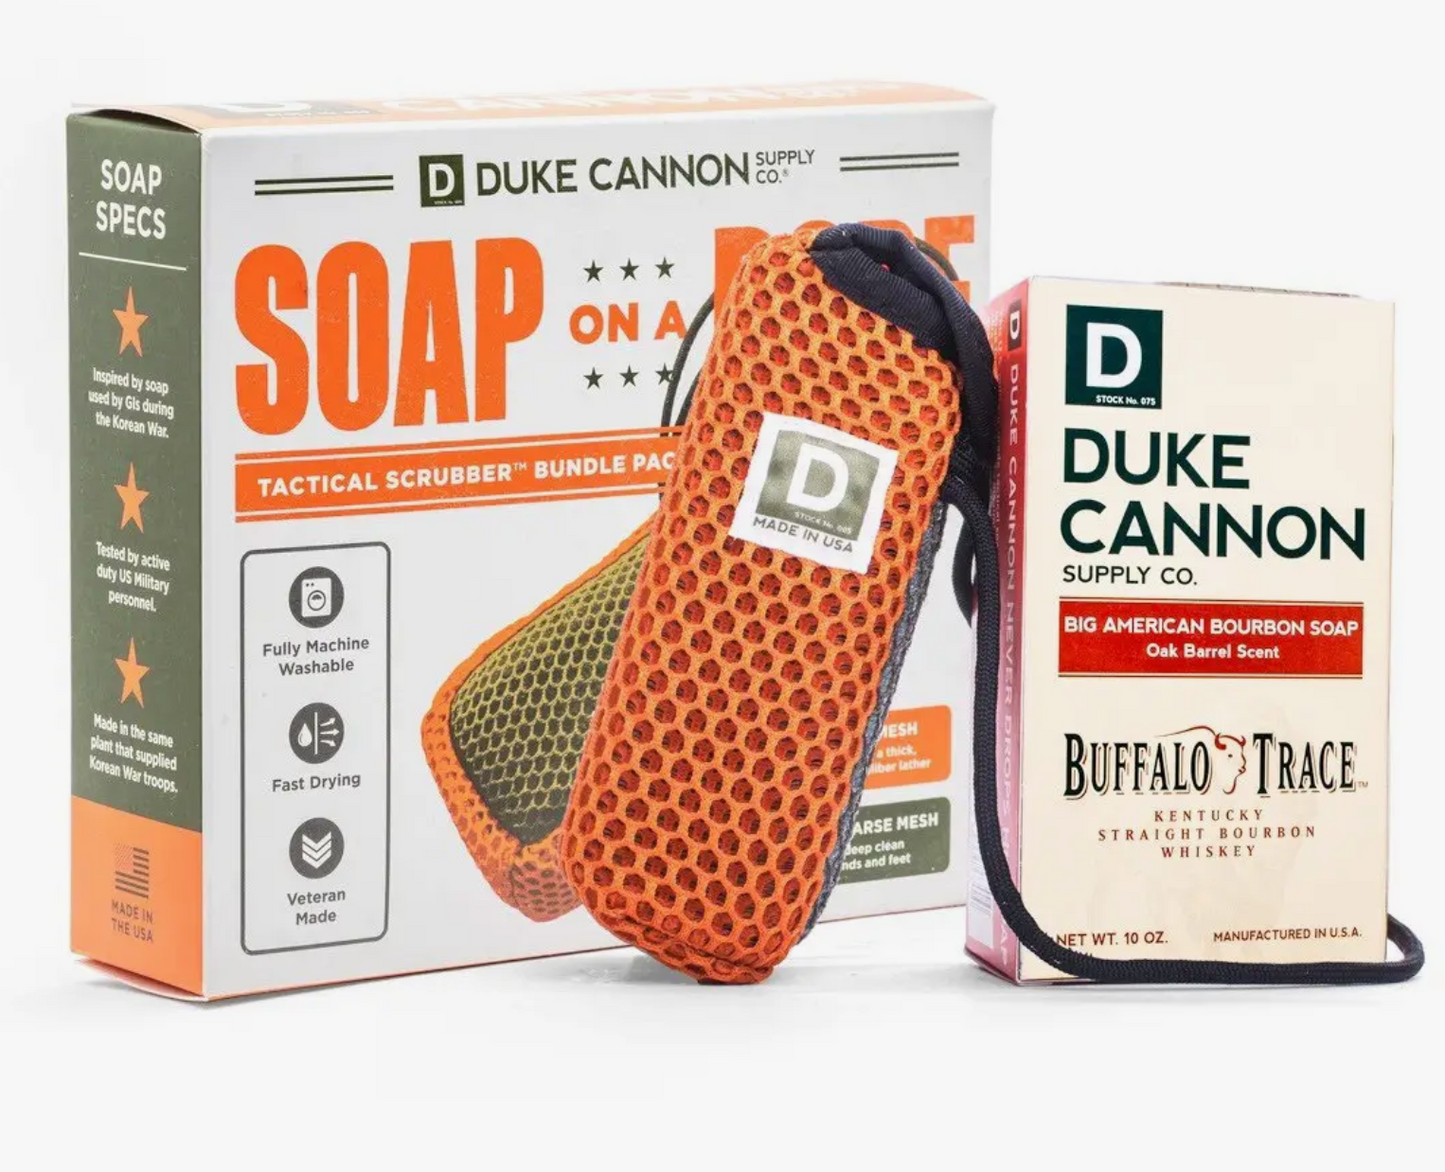 Soap on a Rope Bundle Pack